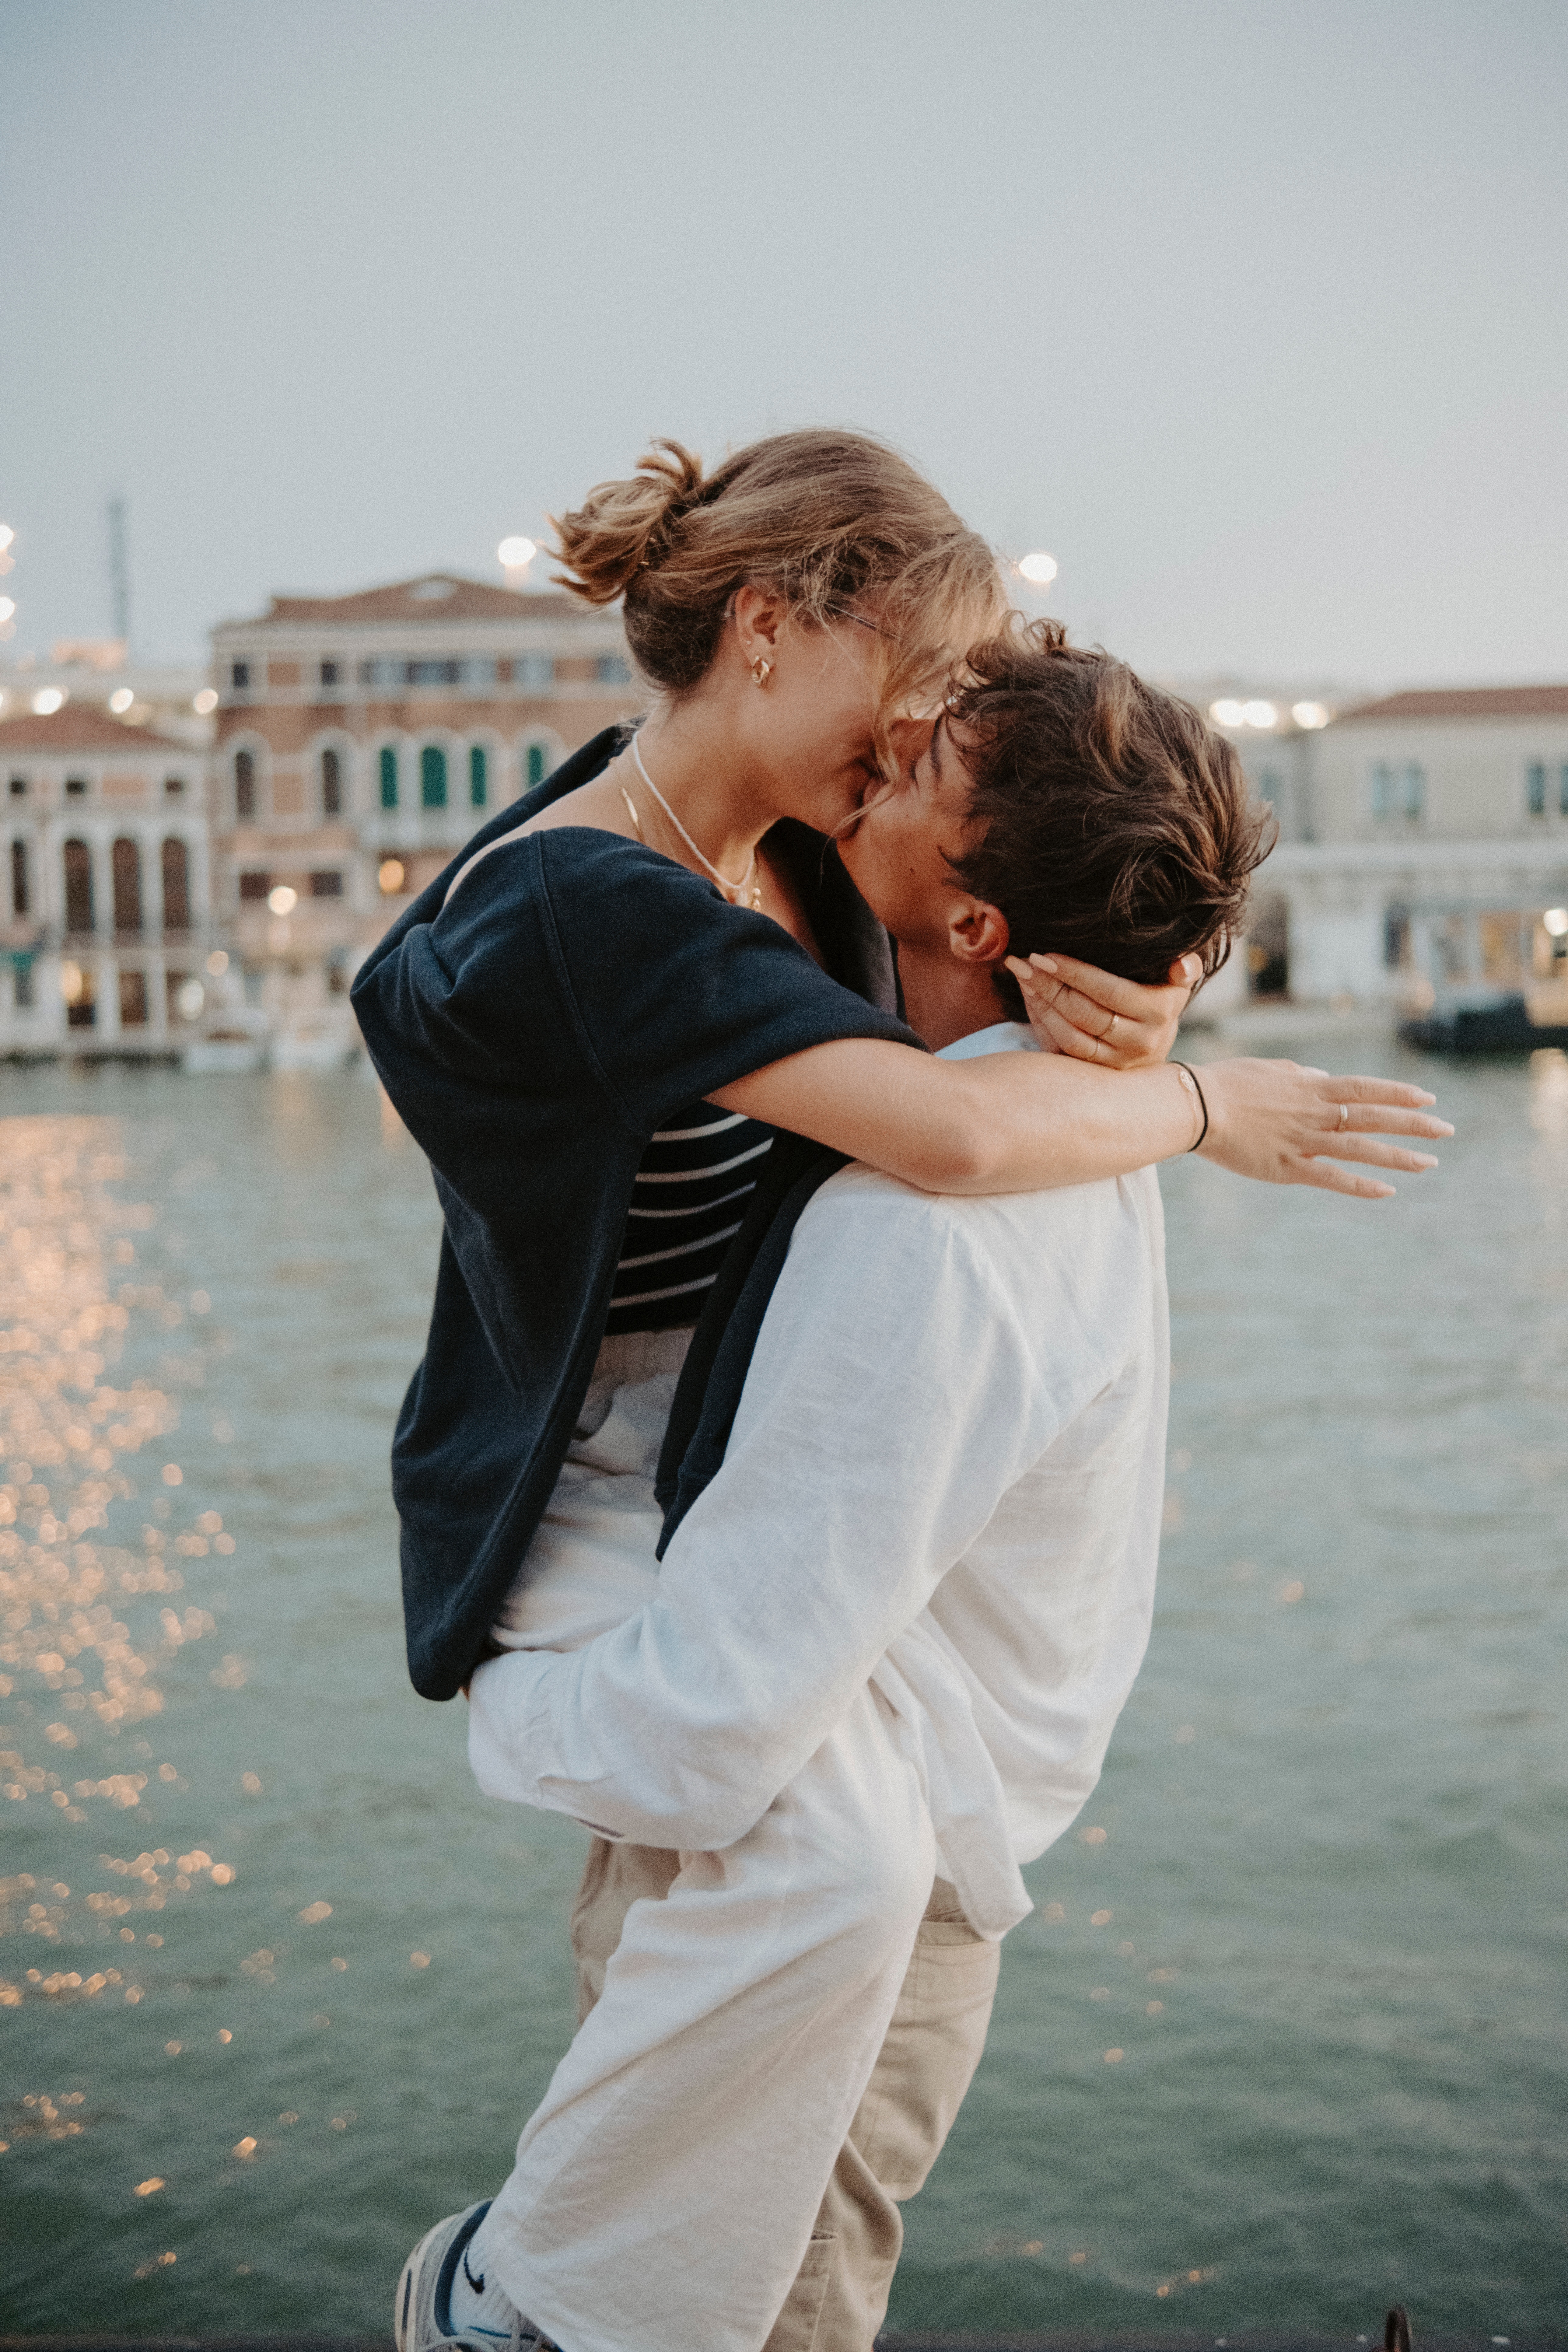 A couple kissing each other. | Source: Pexels